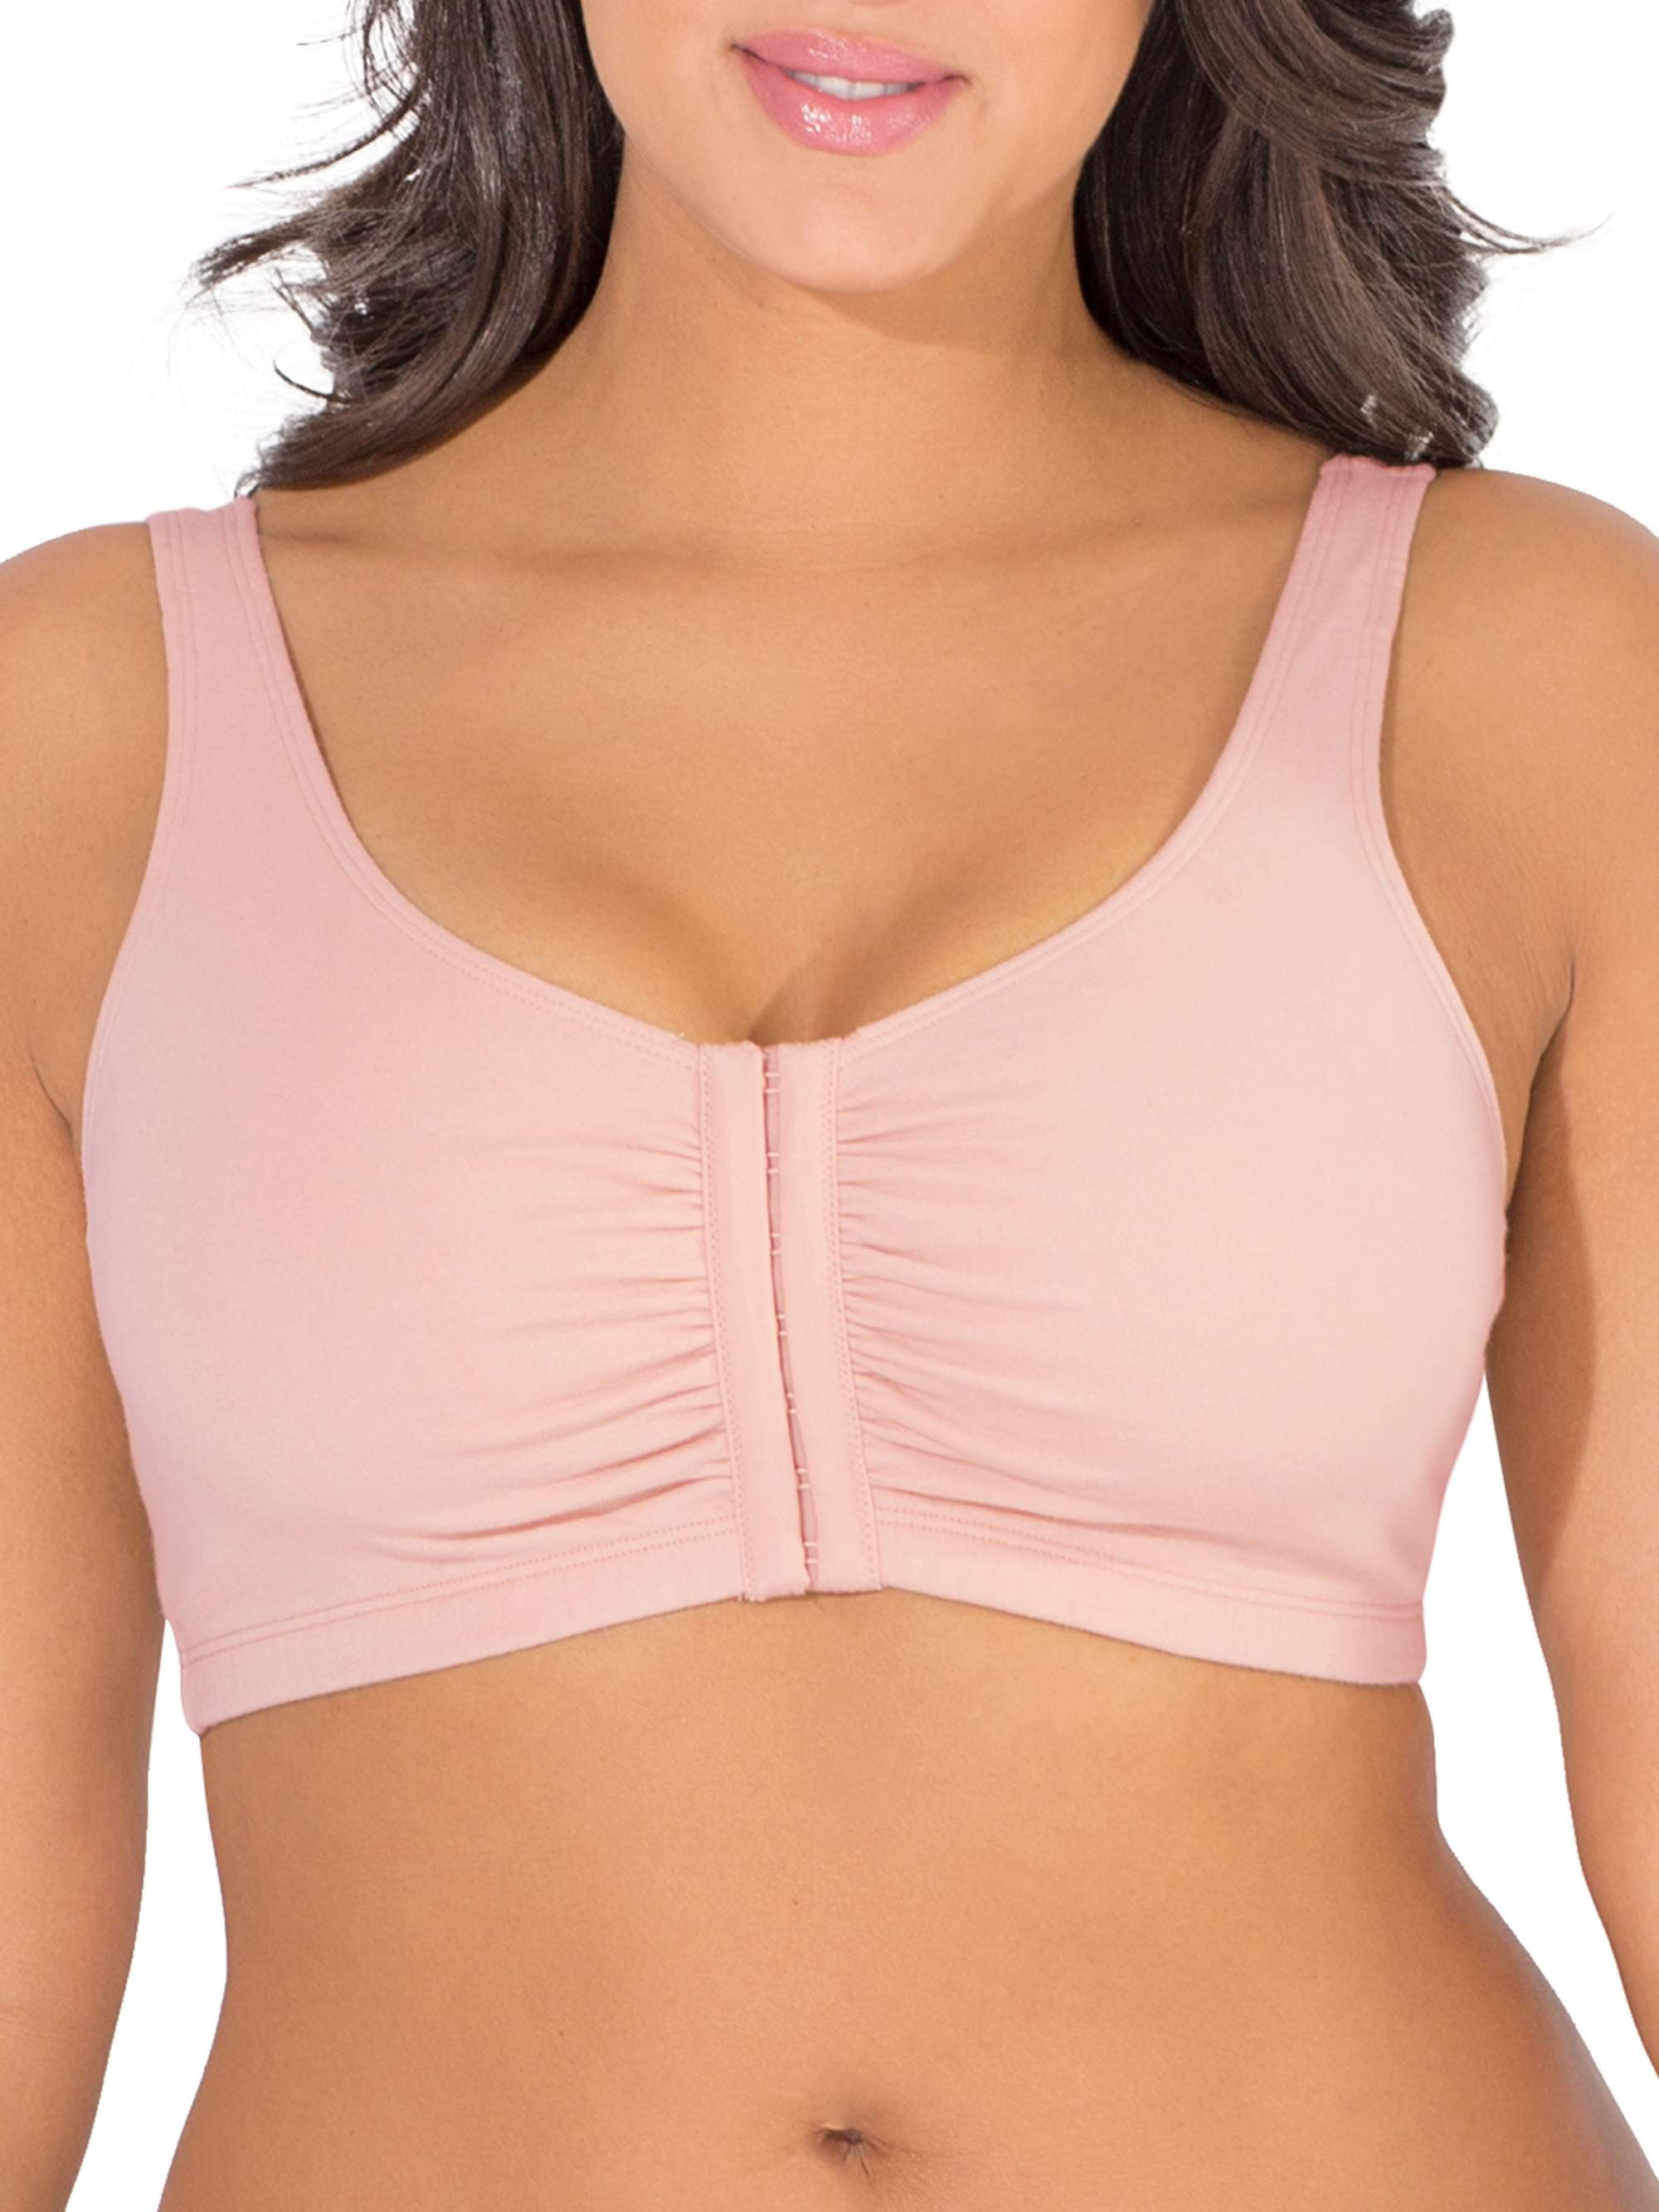 Fruit of the Loom Women's Comfort Front Close Sports Bra, Style